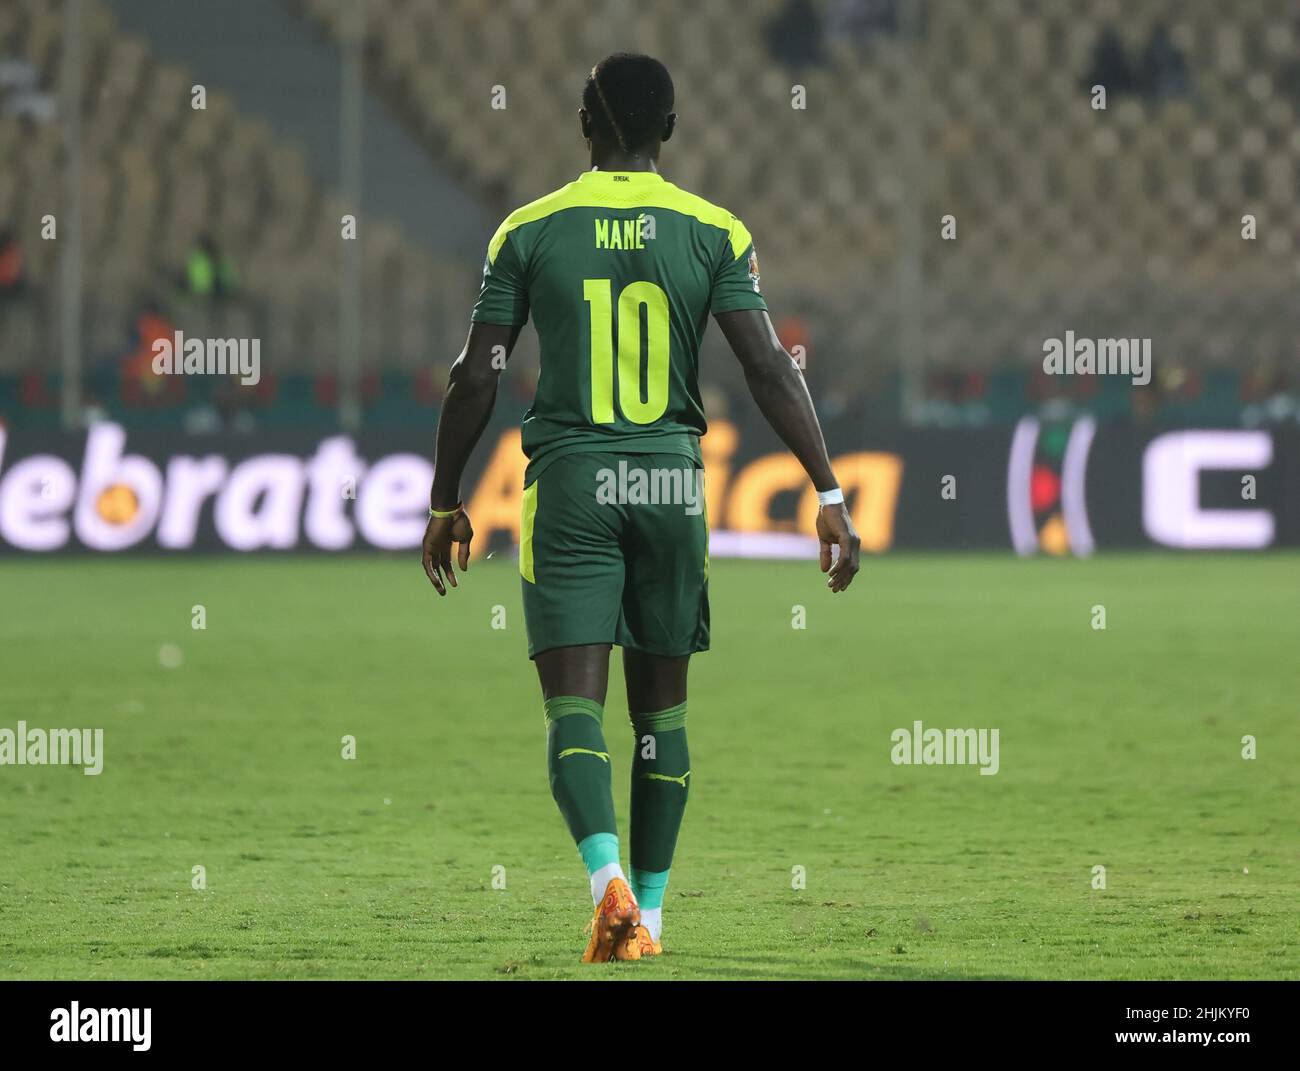 Cameroon, Yaounde, January 30 2022 - Sadio Mane of Senegal during the Africa Cup of Nations - Play Offs - Quarter-finals match between Senegal and Equatorial Guinea at Stade Ahmadou Ahidjo, Yaounde, Cameroon, 30/01/2022. Photo SF Credit: Sebo47/Alamy Live News Stock Photo